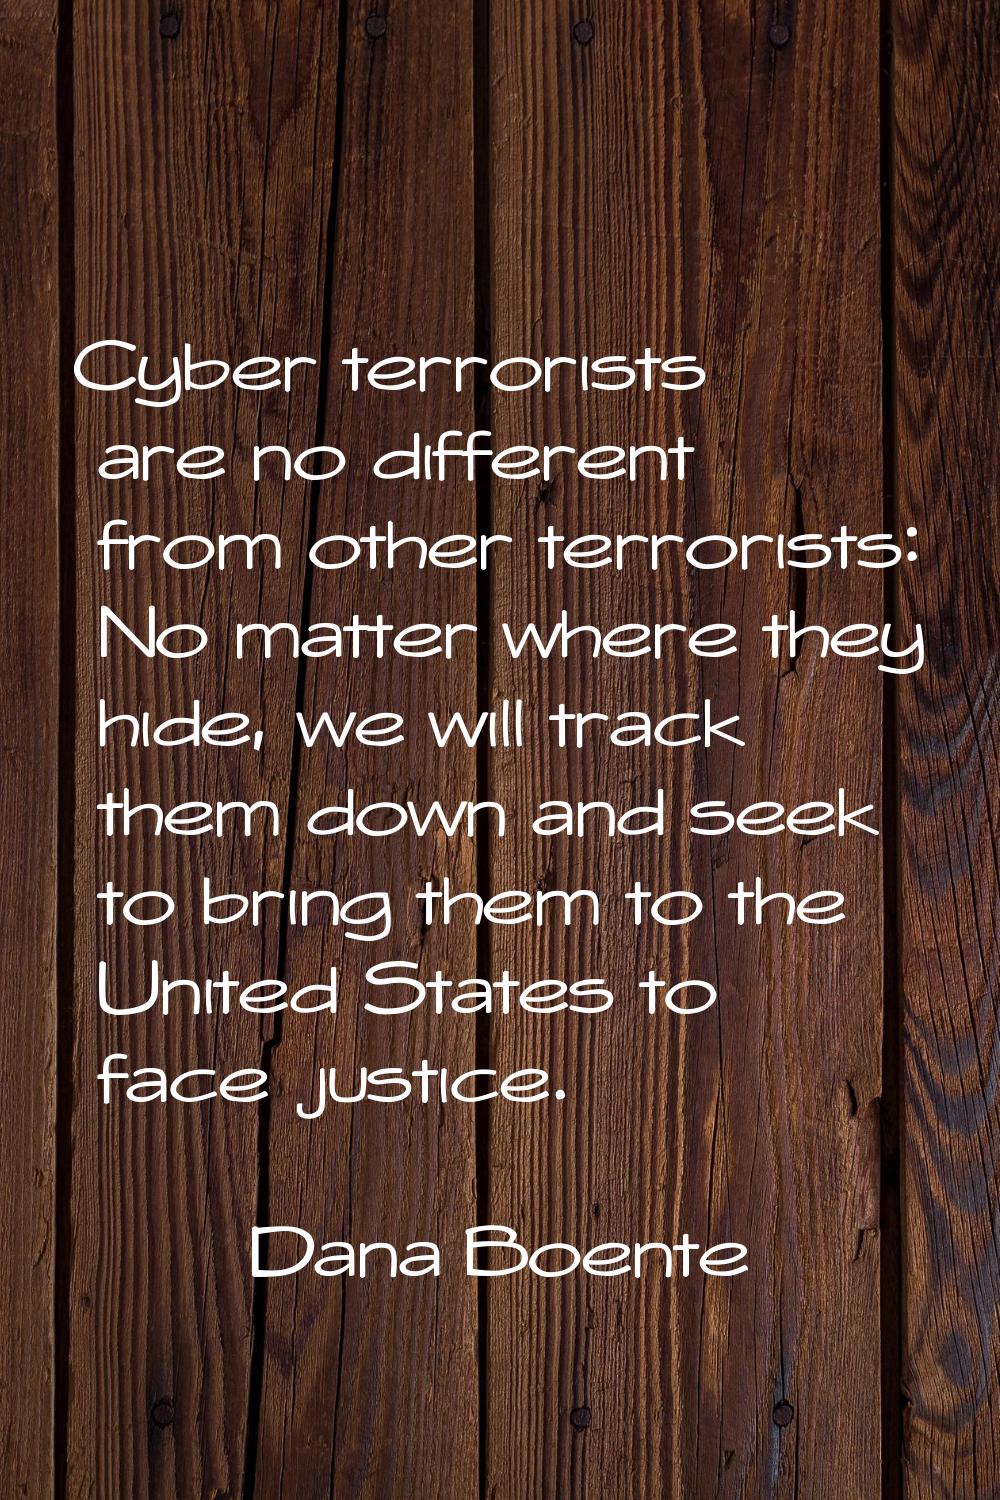 Cyber terrorists are no different from other terrorists: No matter where they hide, we will track t